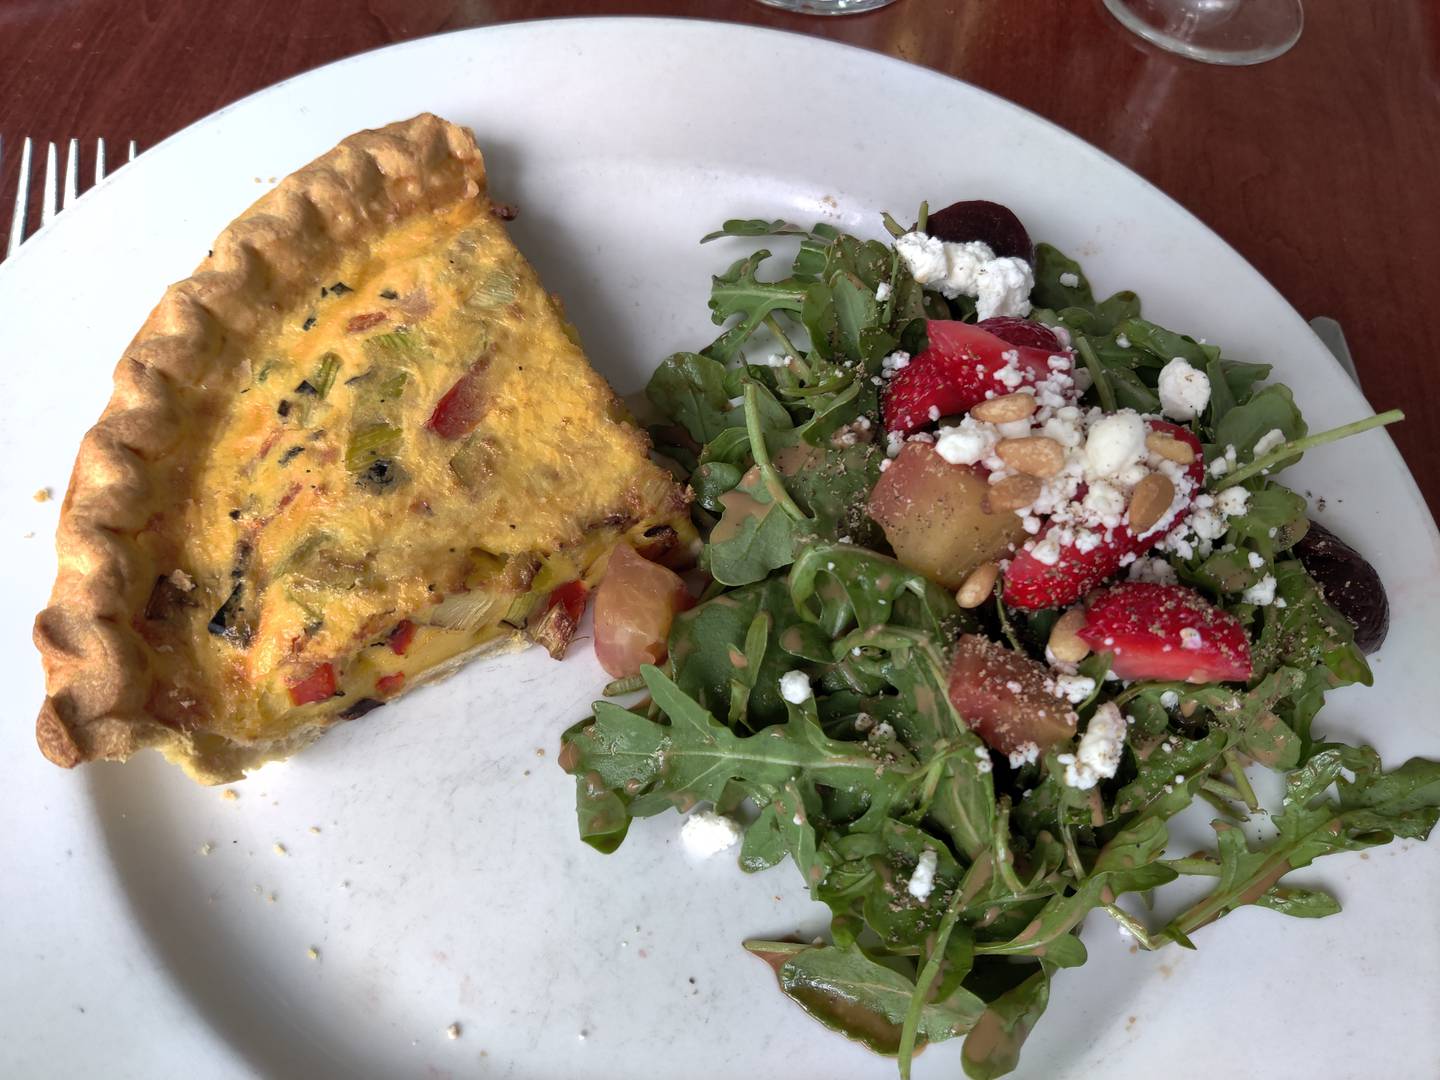 Red pepper and leek quiche at Fiora's in Geneva.